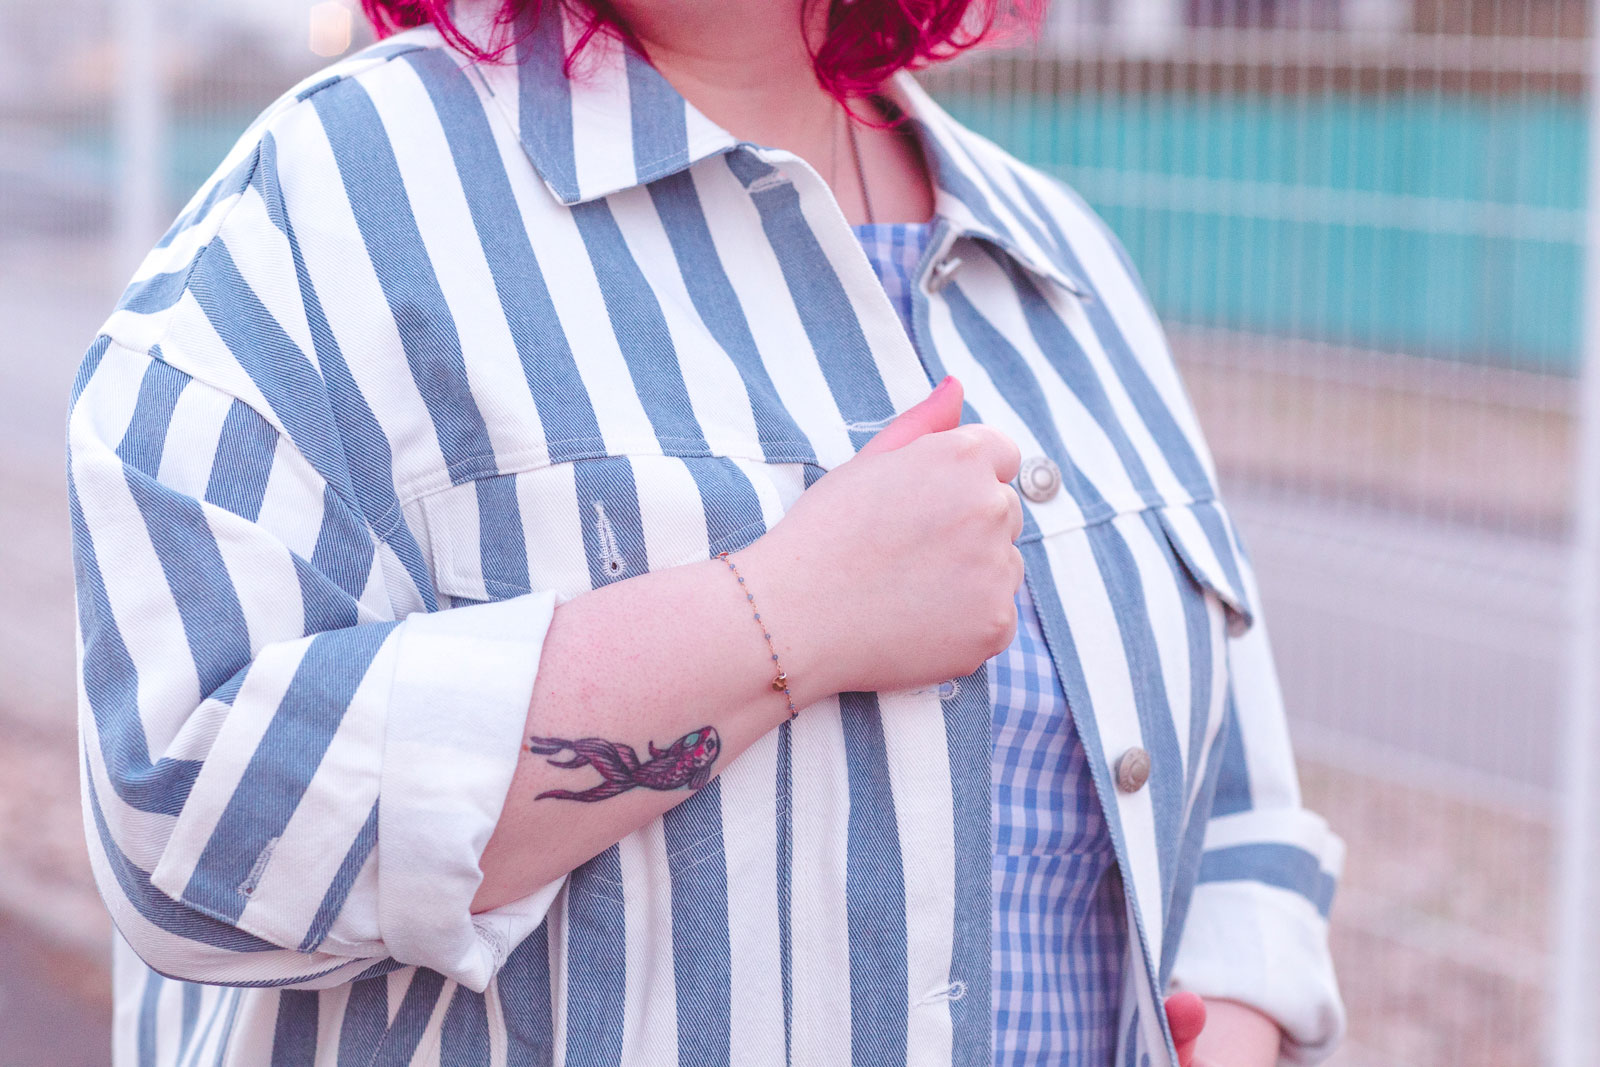 ninaah bulles, j'aime mon corps, dorothy, look, grande taille, bodypo, curvy, ronde, plussize, shein plussize